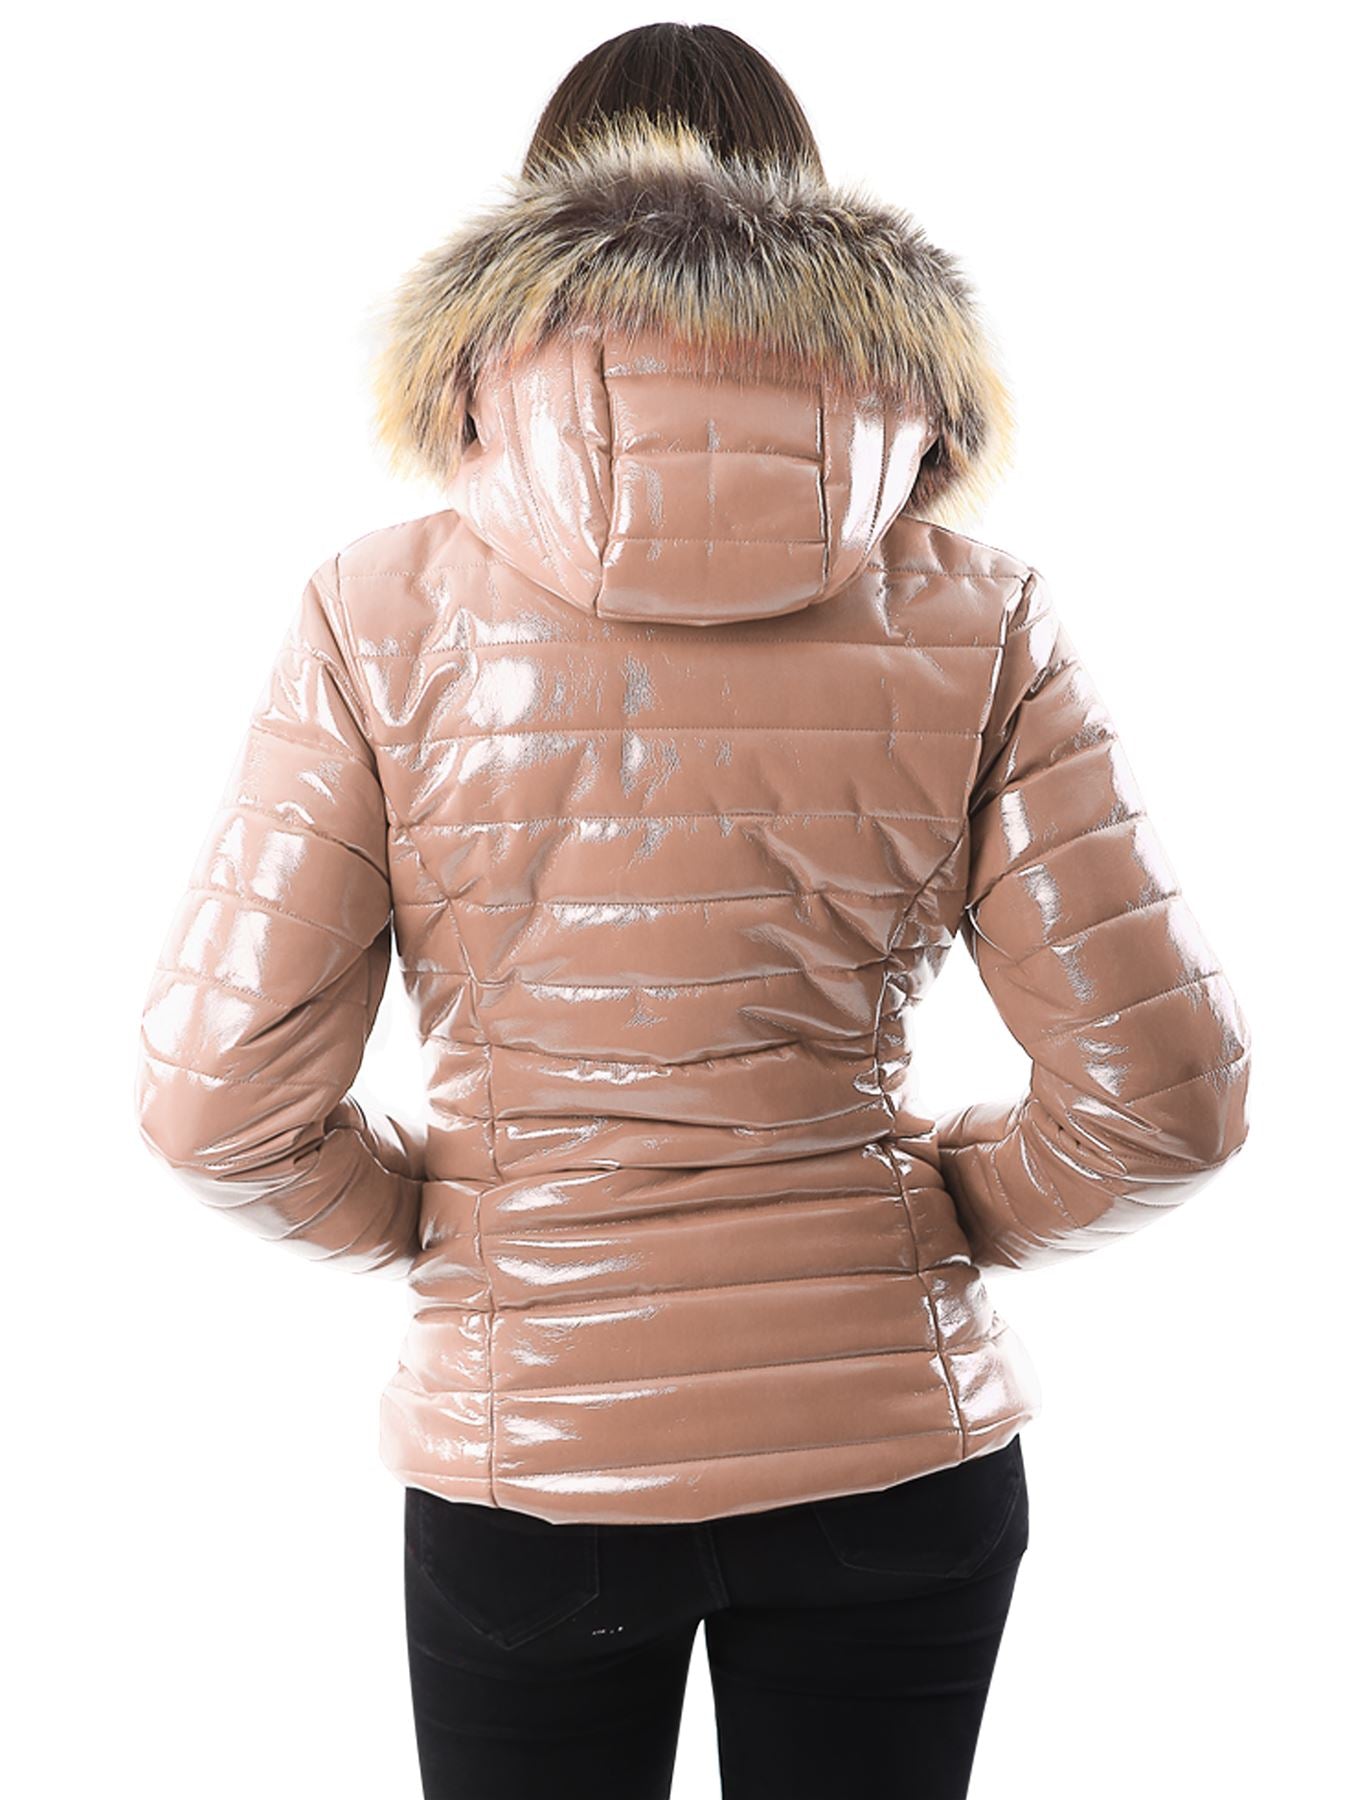 Georgia Quilted Faux Fur Hooded Long Sleeve Padded Jackets